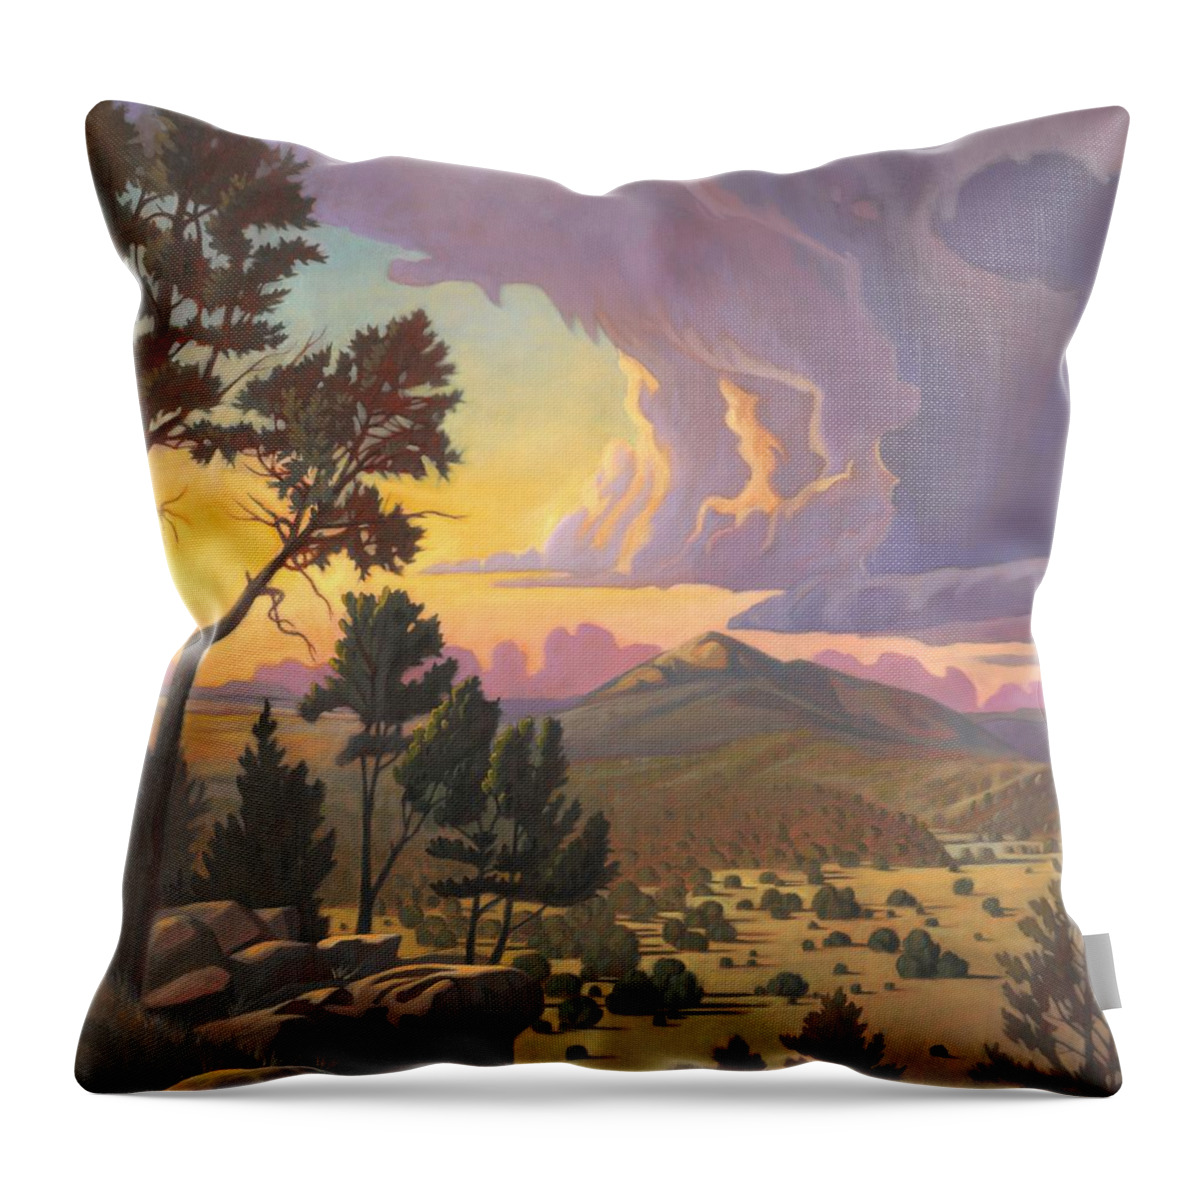 Santa Fe Throw Pillow featuring the painting Santa Fe Baldy - Detail by Art West